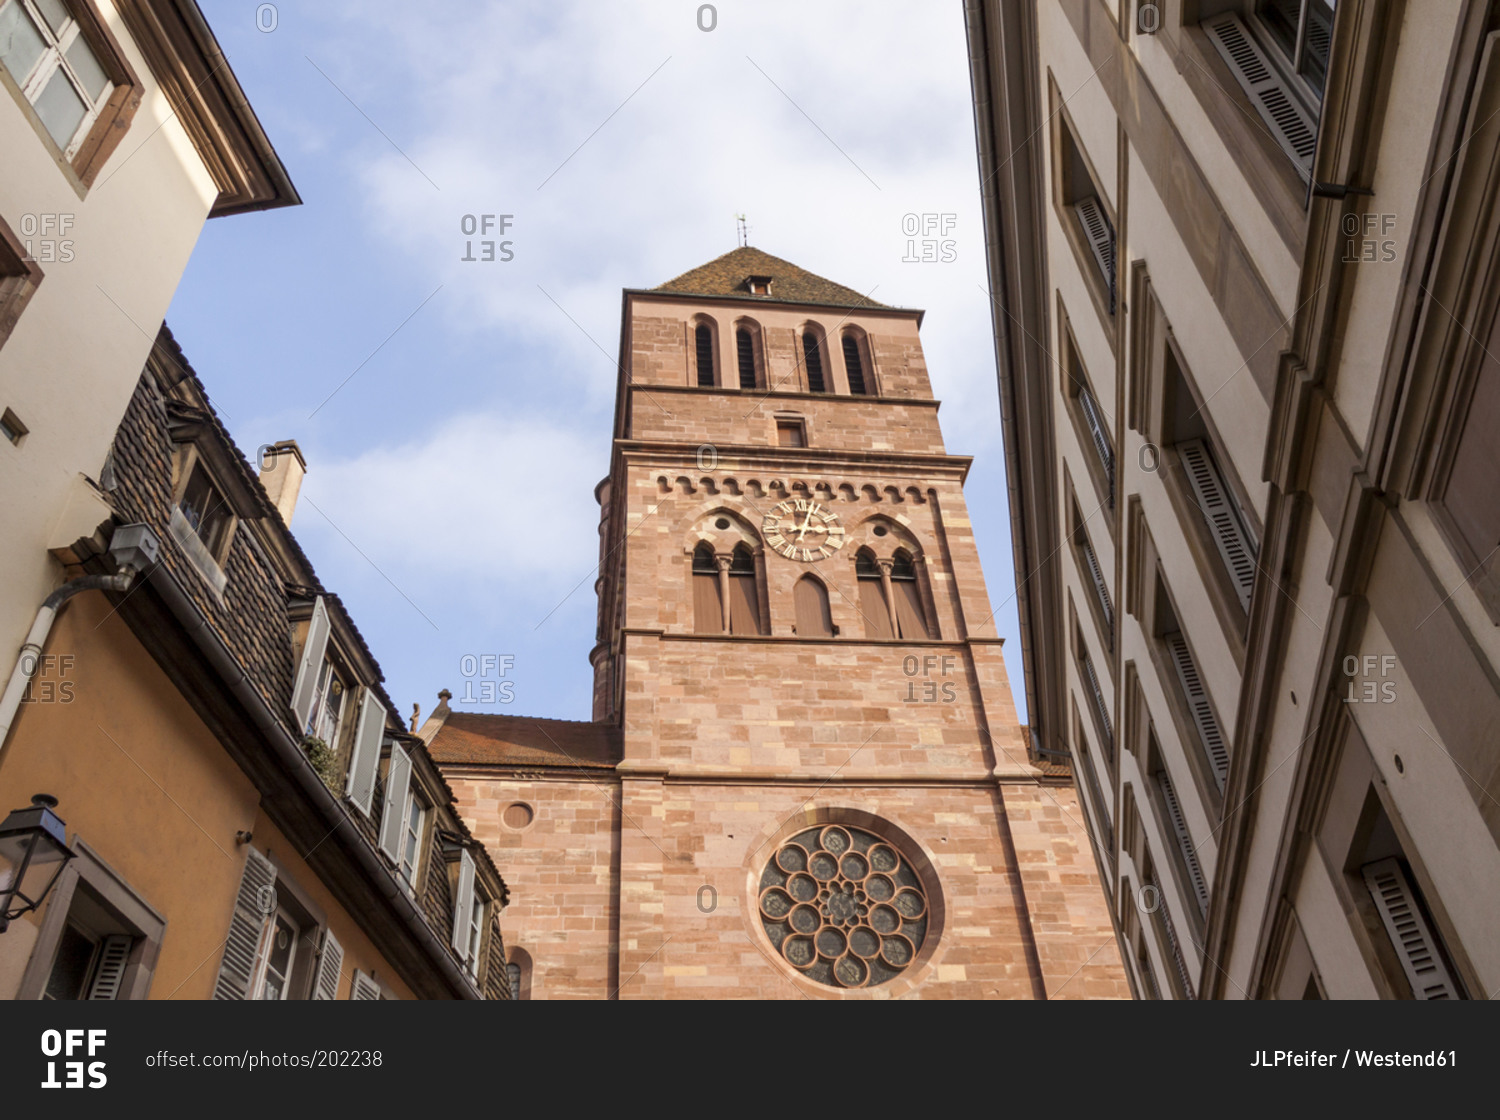 France, Strasbourg, view to Thomas Church from below